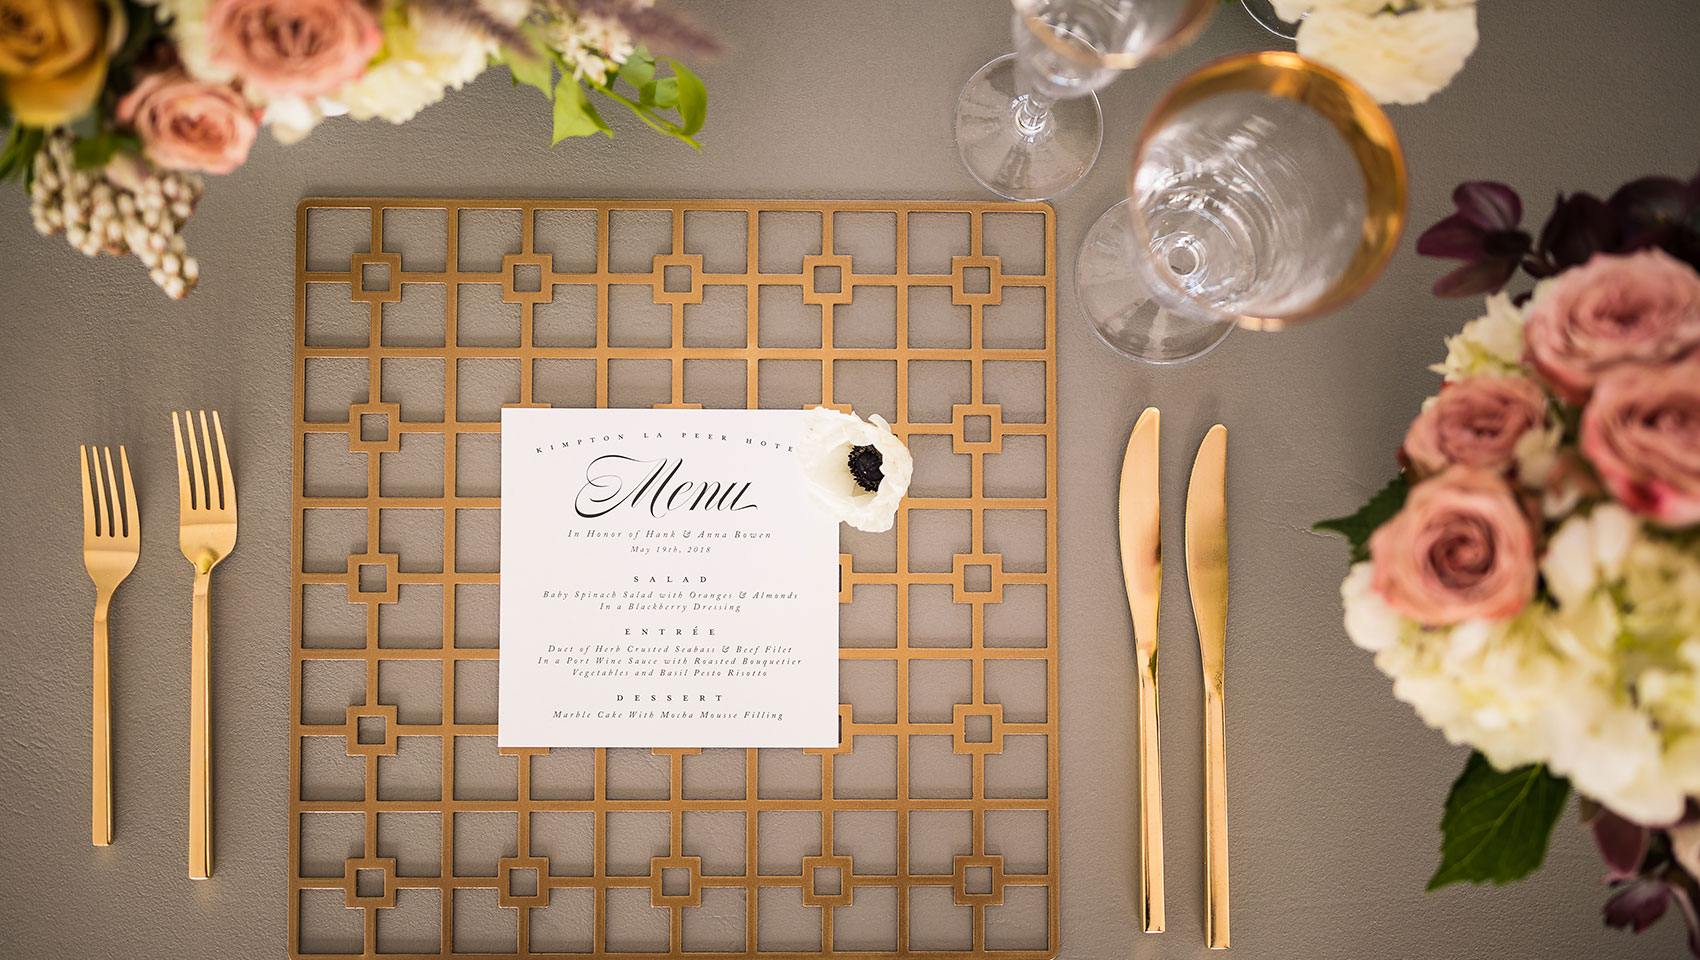 menu with cutlery and flower decorations around